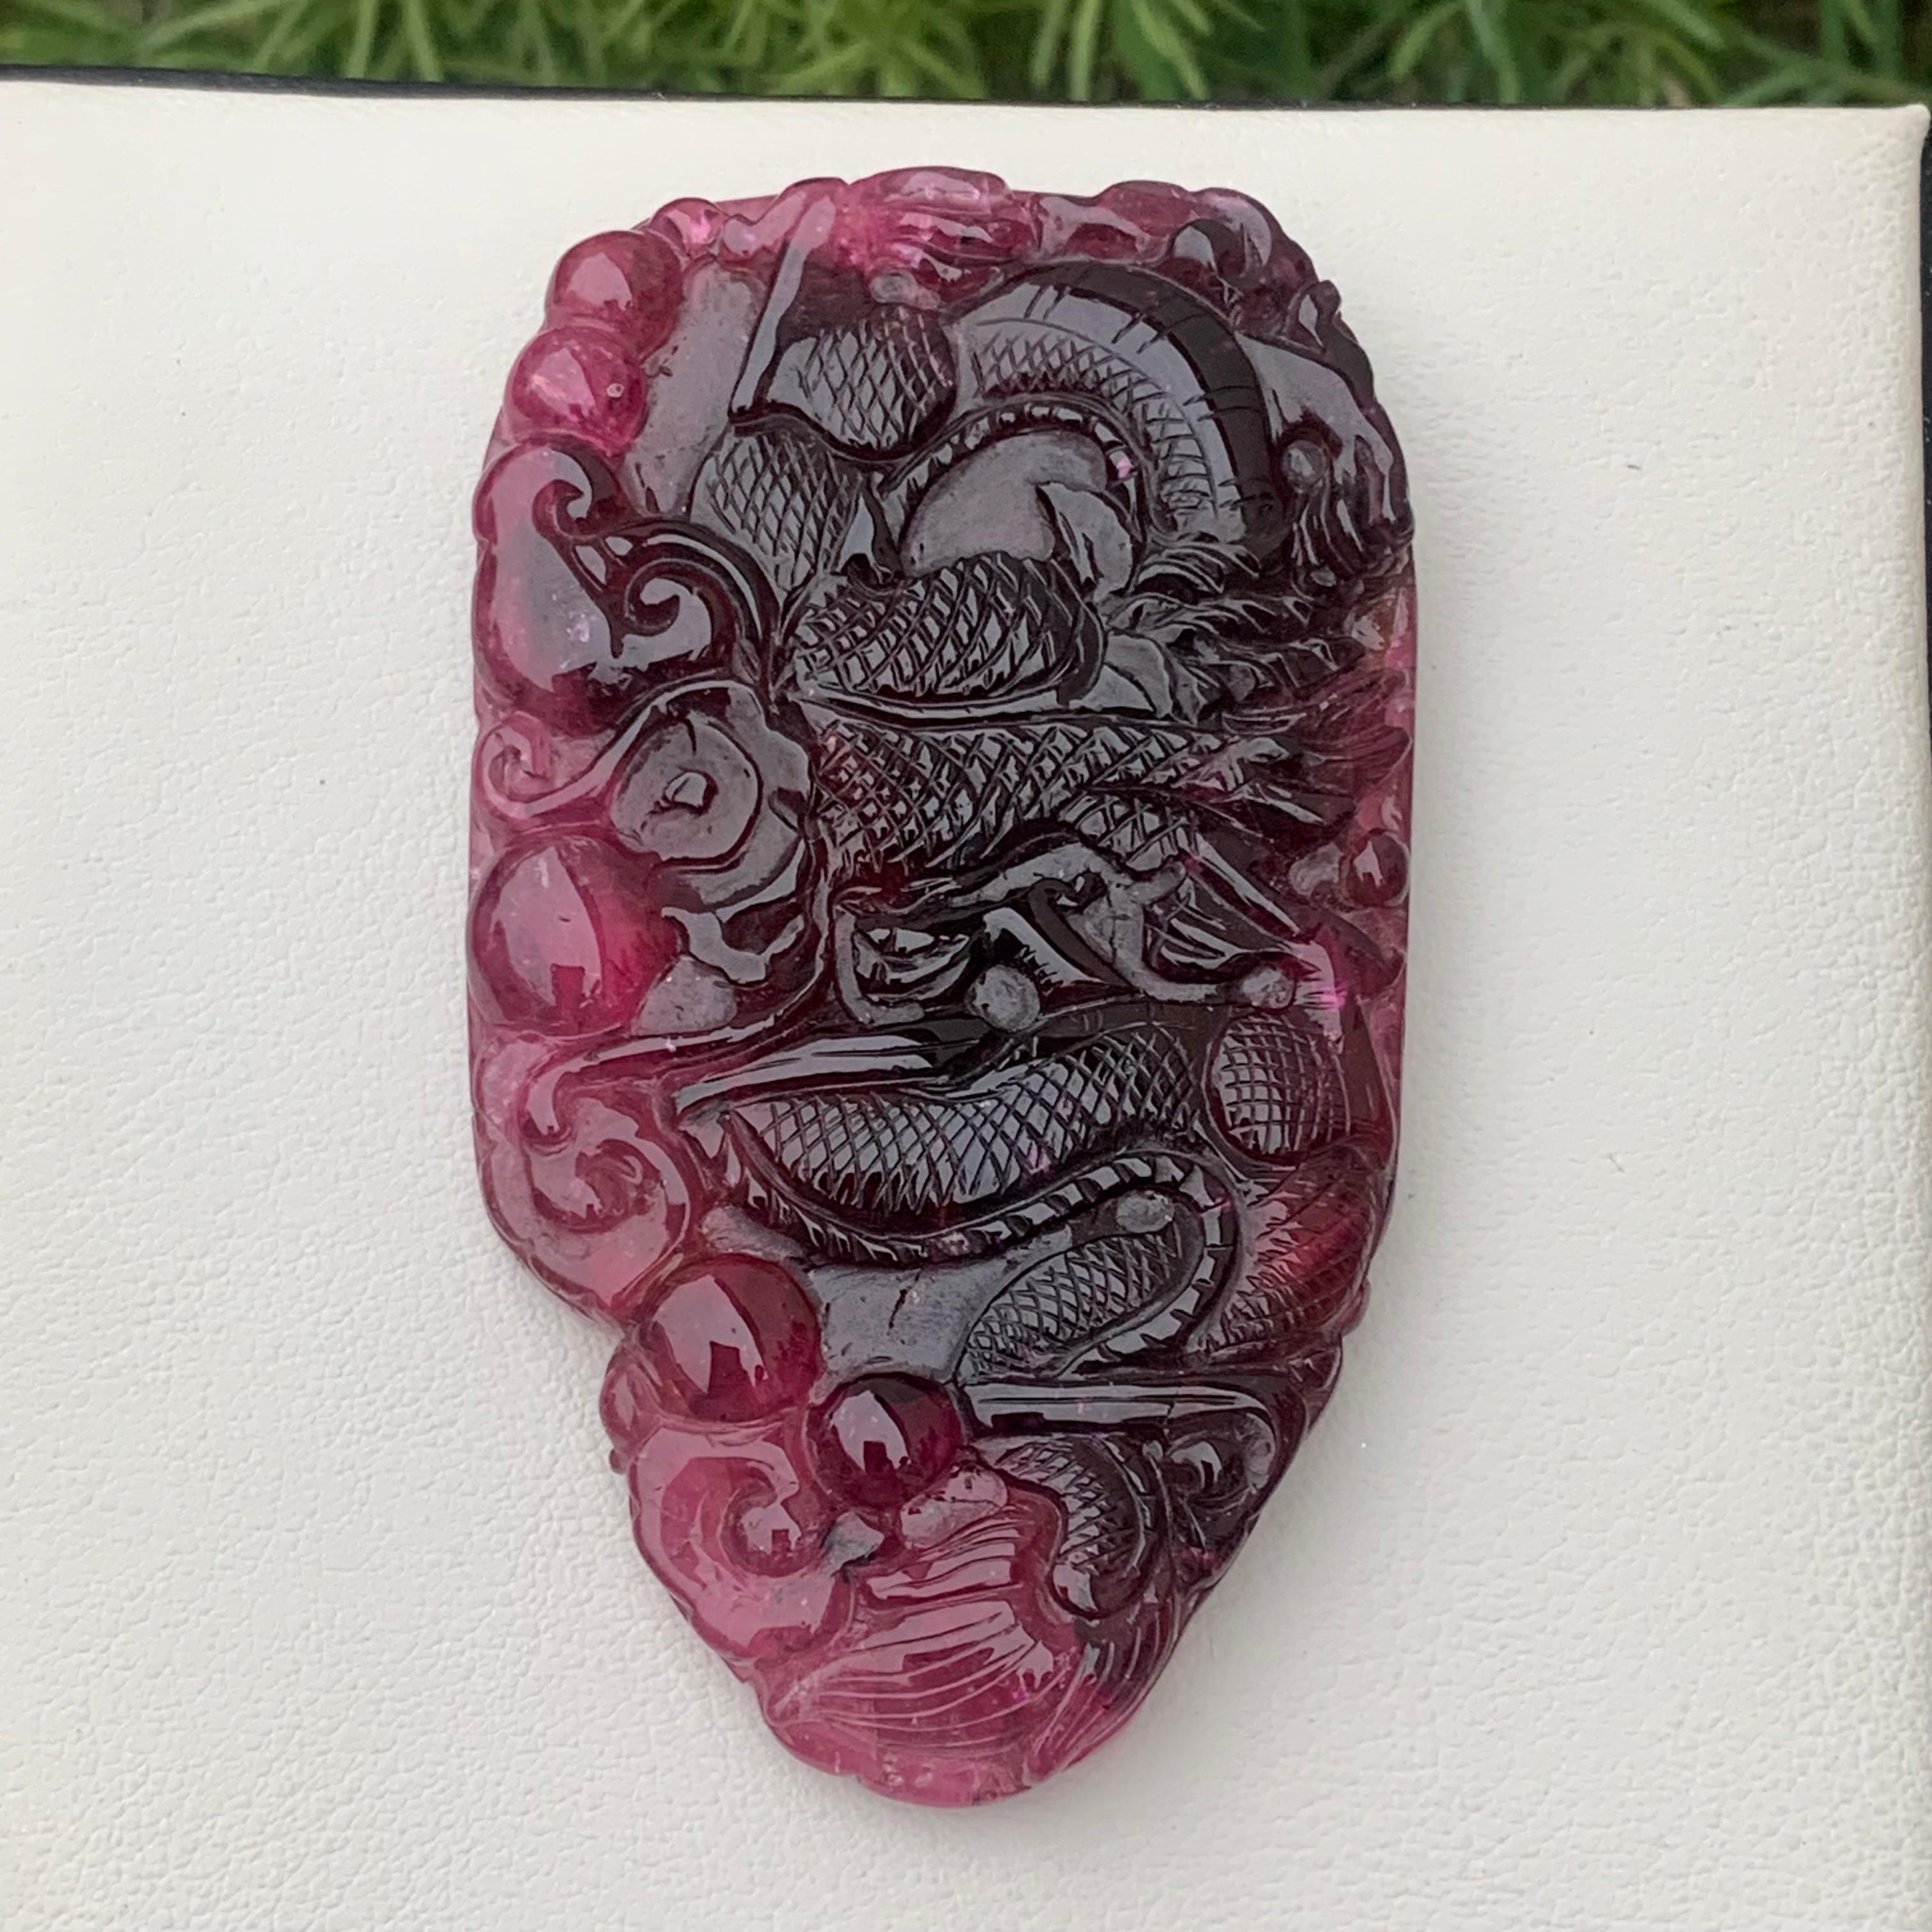 Women's or Men's Amazing Carved Huge 295.30 Carat Natural Tourmaline Carving for Healing Jewelry